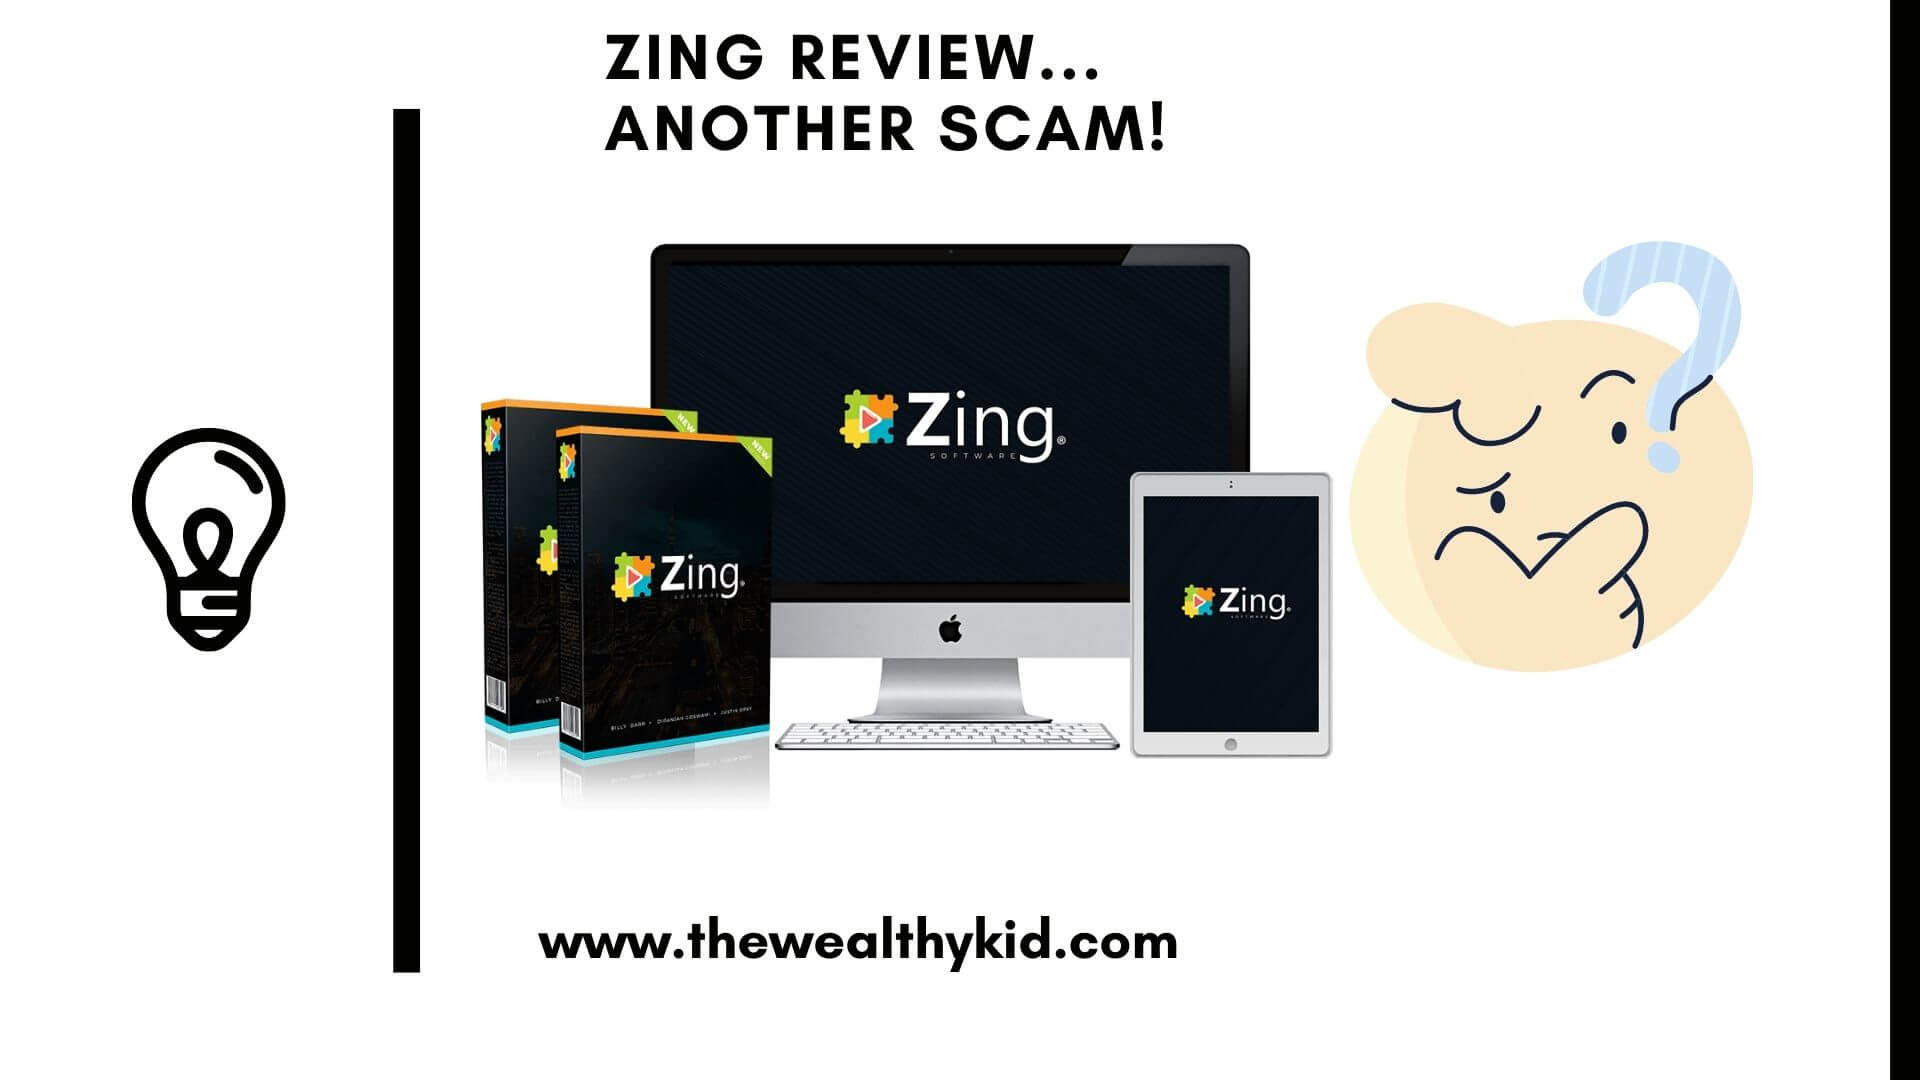 What is Zing Software? It’s Another Scam!